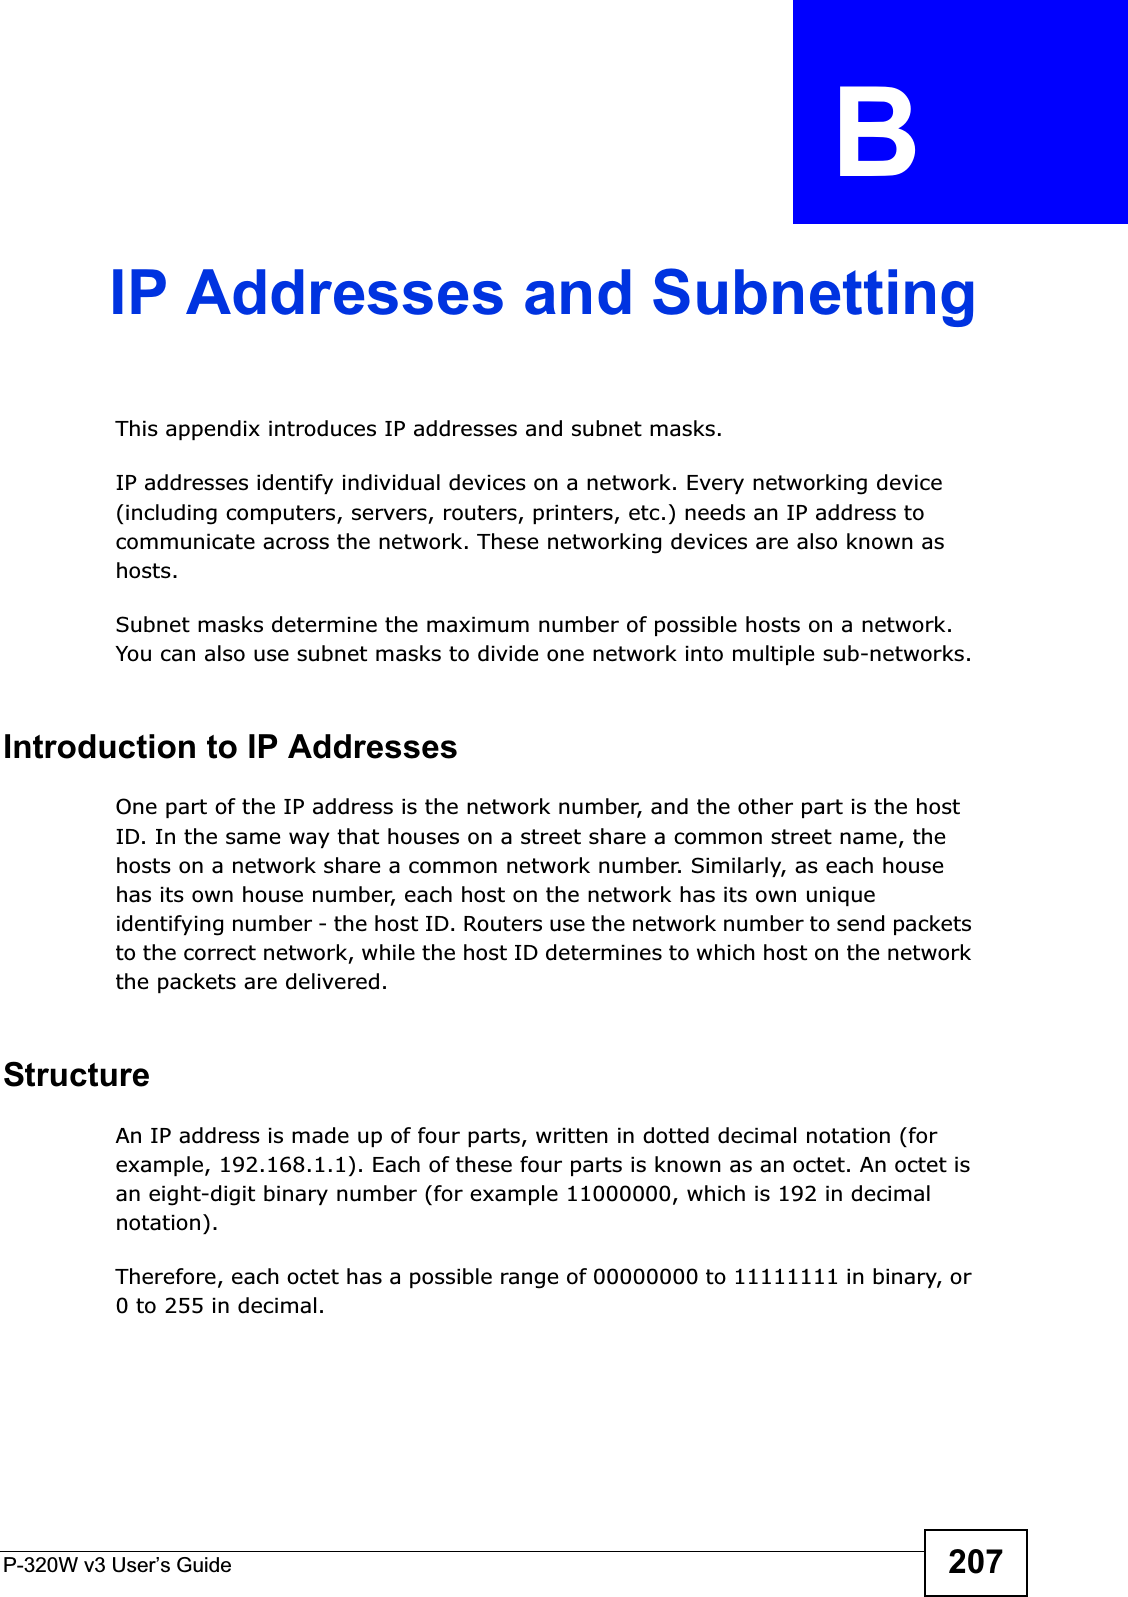 P-320W v3 User’s Guide 207APPENDIX  B IP Addresses and SubnettingThis appendix introduces IP addresses and subnet masks. IP addresses identify individual devices on a network. Every networking device (including computers, servers, routers, printers, etc.) needs an IP address to communicate across the network. These networking devices are also known as hosts.Subnet masks determine the maximum number of possible hosts on a network. You can also use subnet masks to divide one network into multiple sub-networks.Introduction to IP AddressesOne part of the IP address is the network number, and the other part is the host ID. In the same way that houses on a street share a common street name, the hosts on a network share a common network number. Similarly, as each house has its own house number, each host on the network has its own unique identifying number - the host ID. Routers use the network number to send packets to the correct network, while the host ID determines to which host on the network the packets are delivered.StructureAn IP address is made up of four parts, written in dotted decimal notation (for example, 192.168.1.1). Each of these four parts is known as an octet. An octet is an eight-digit binary number (for example 11000000, which is 192 in decimal notation). Therefore, each octet has a possible range of 00000000 to 11111111 in binary, or 0 to 255 in decimal.